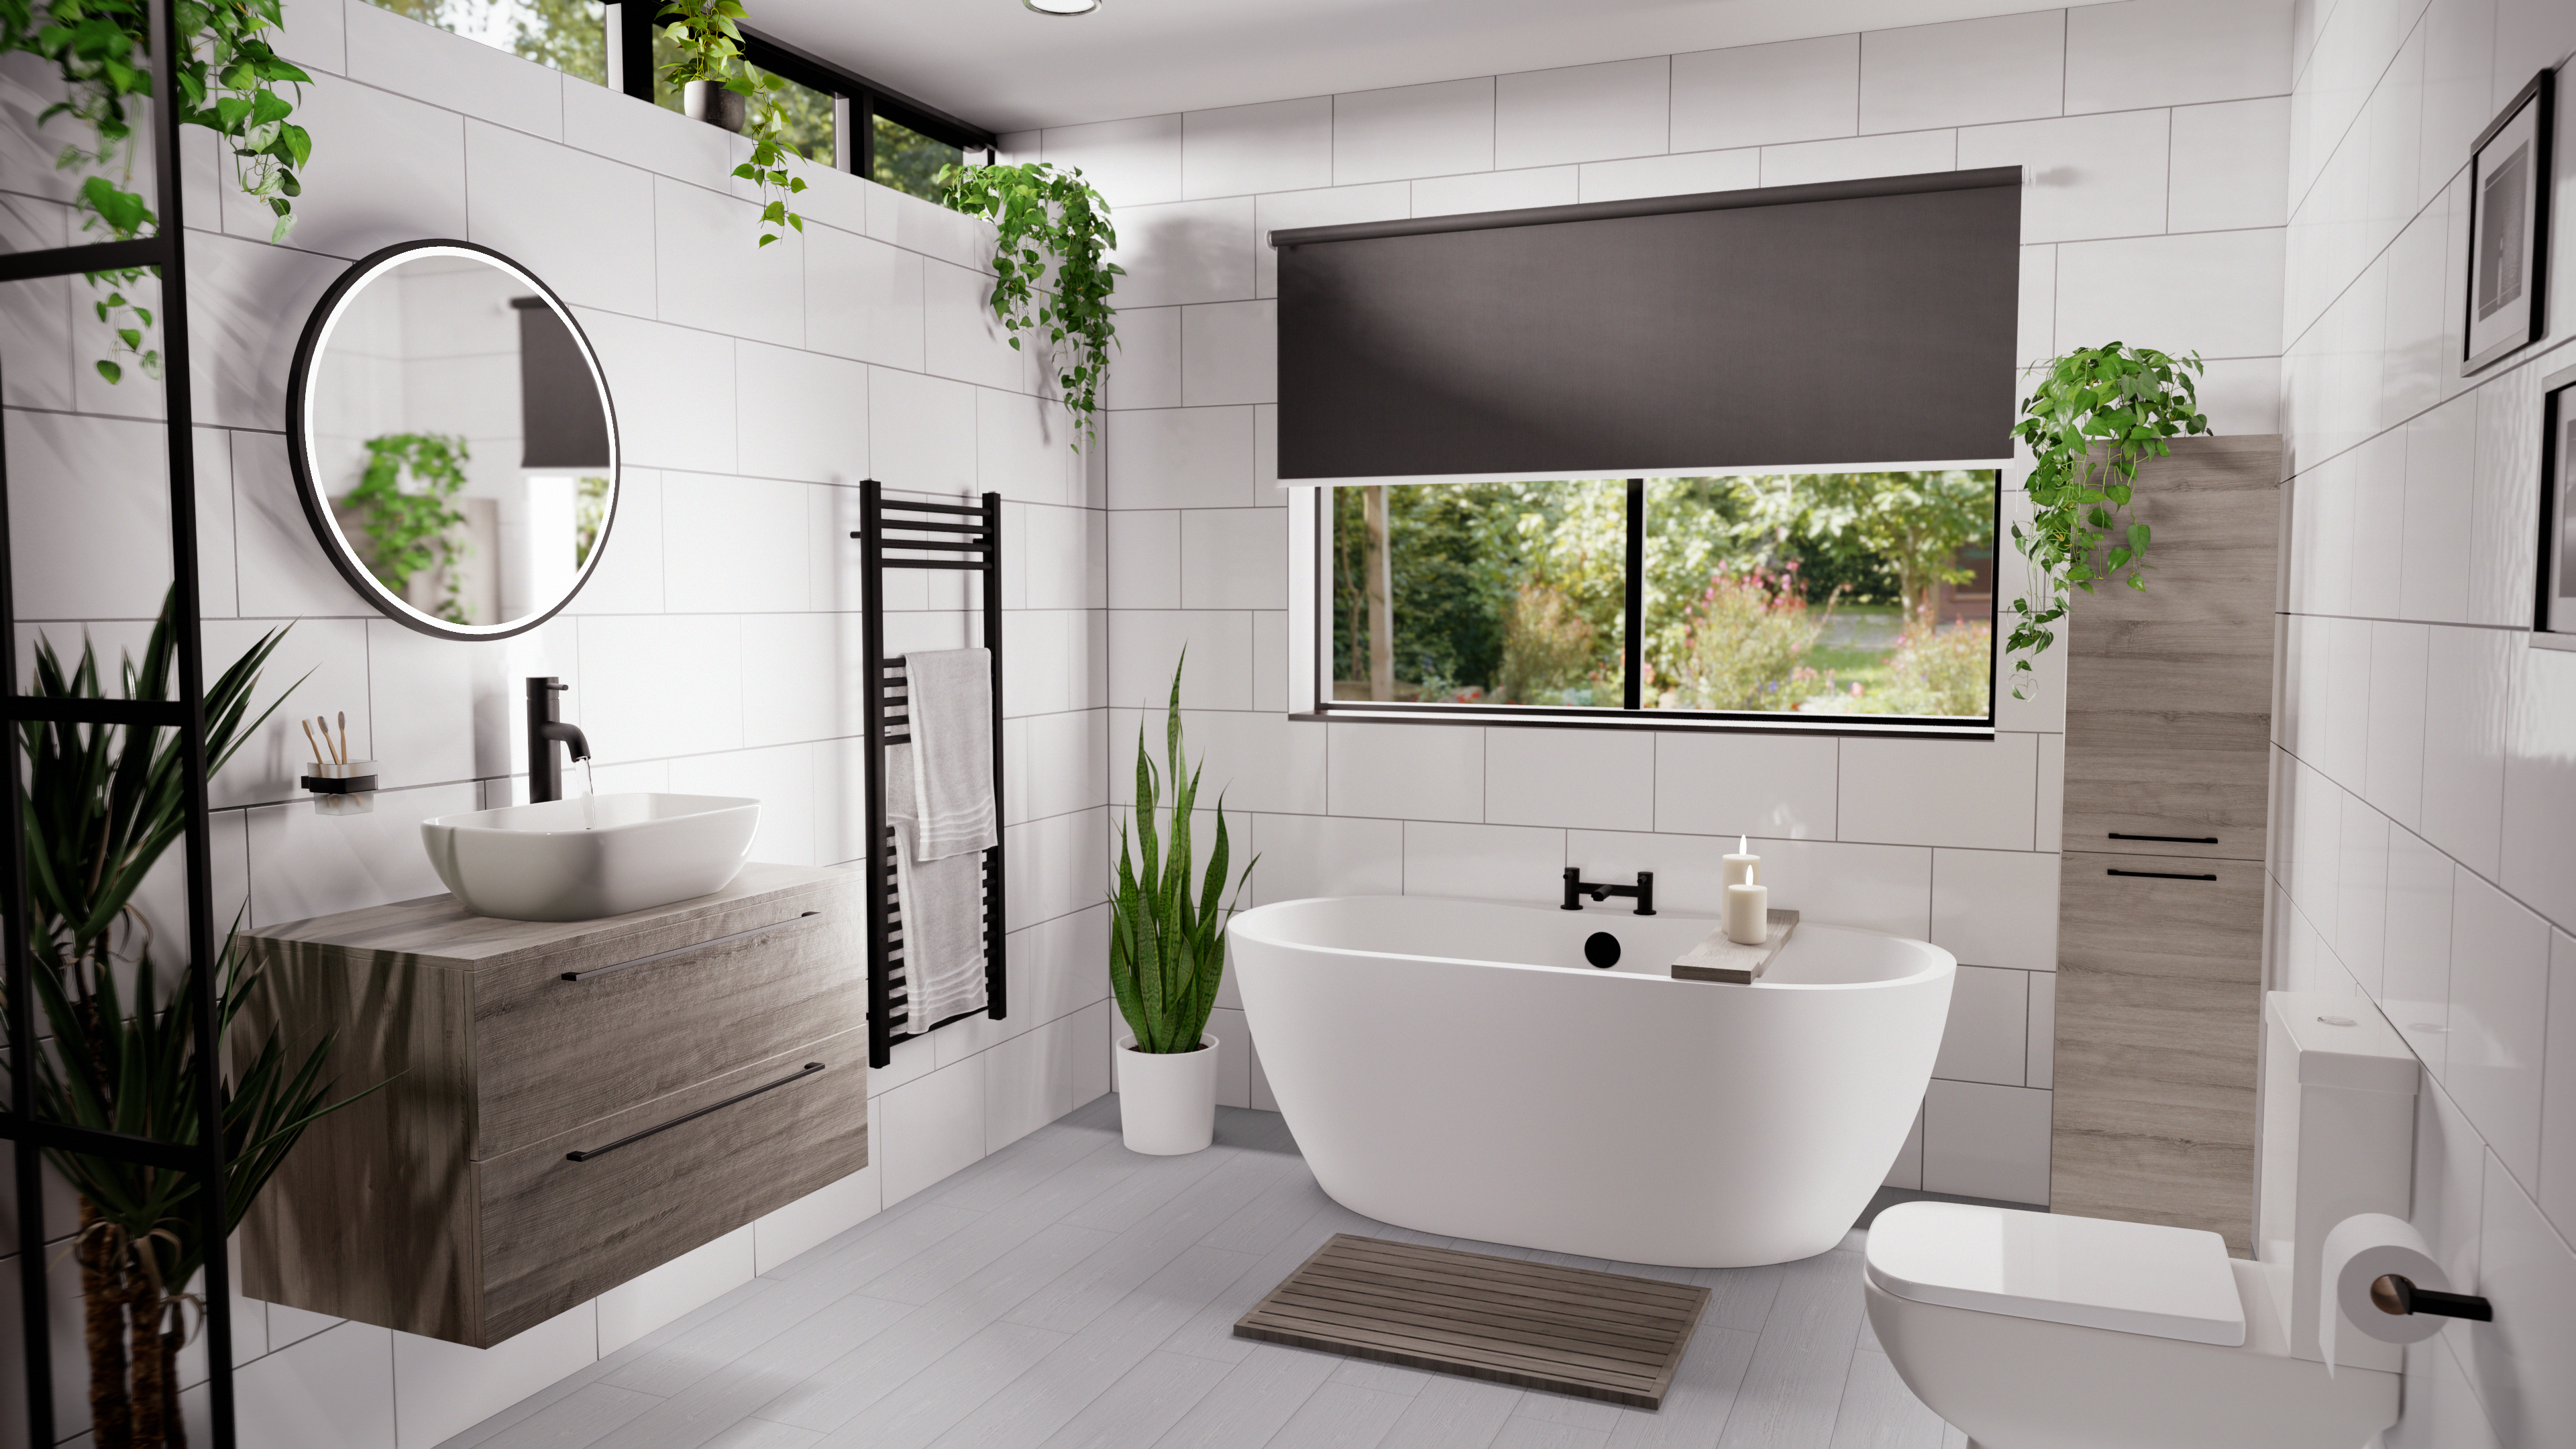 Modern minimalist bathroom with white tiles and black fixtures